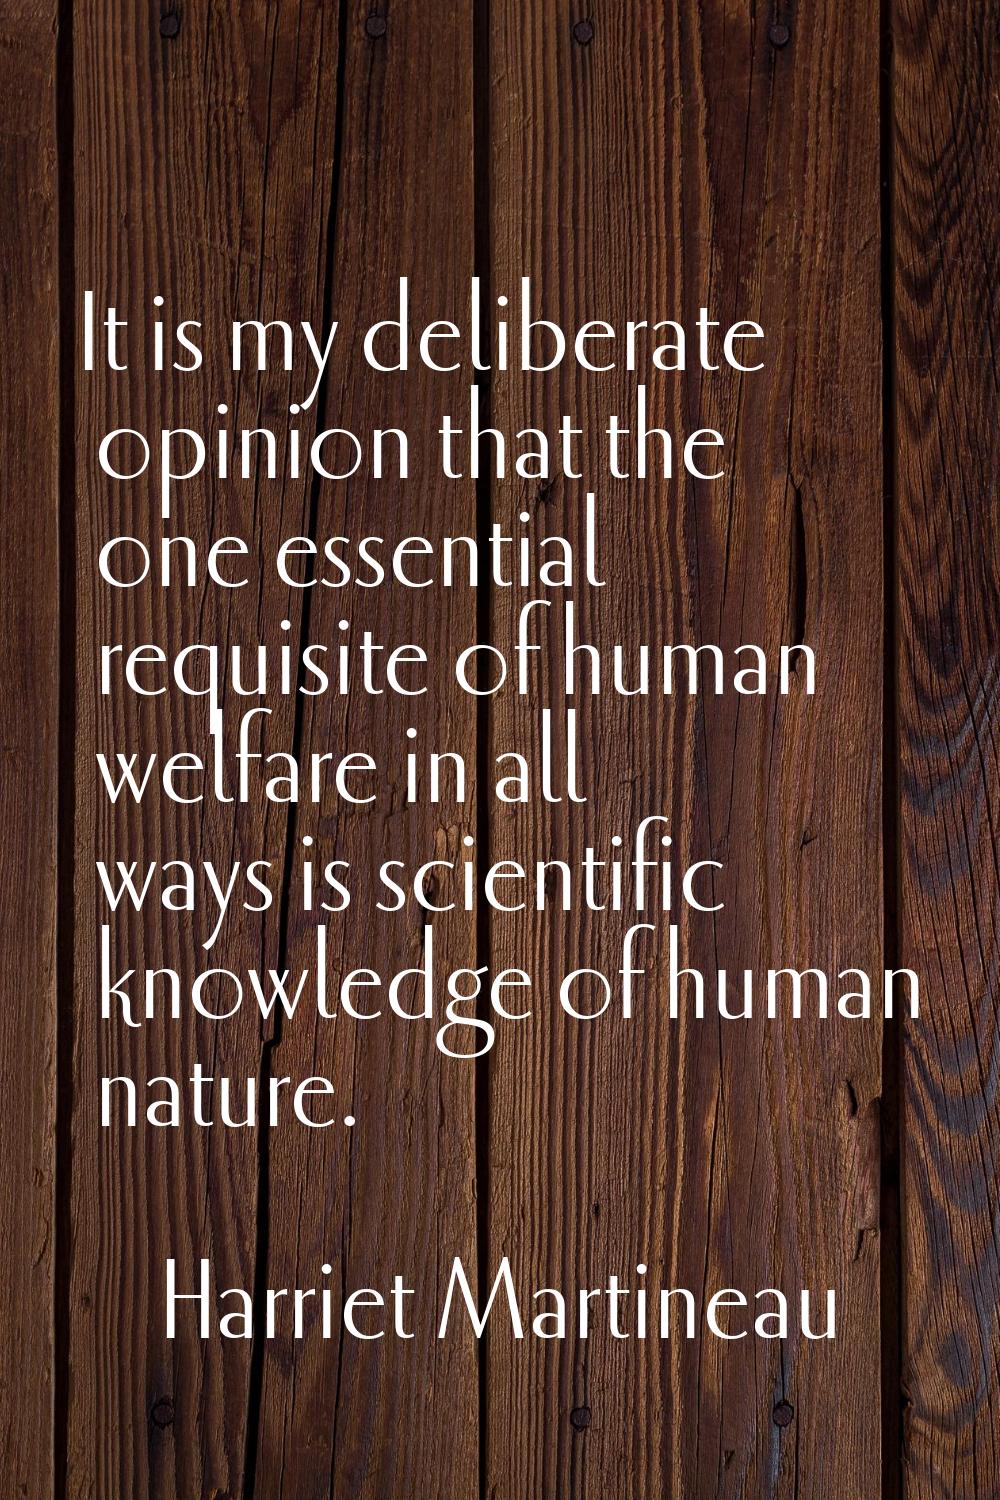 It is my deliberate opinion that the one essential requisite of human welfare in all ways is scient